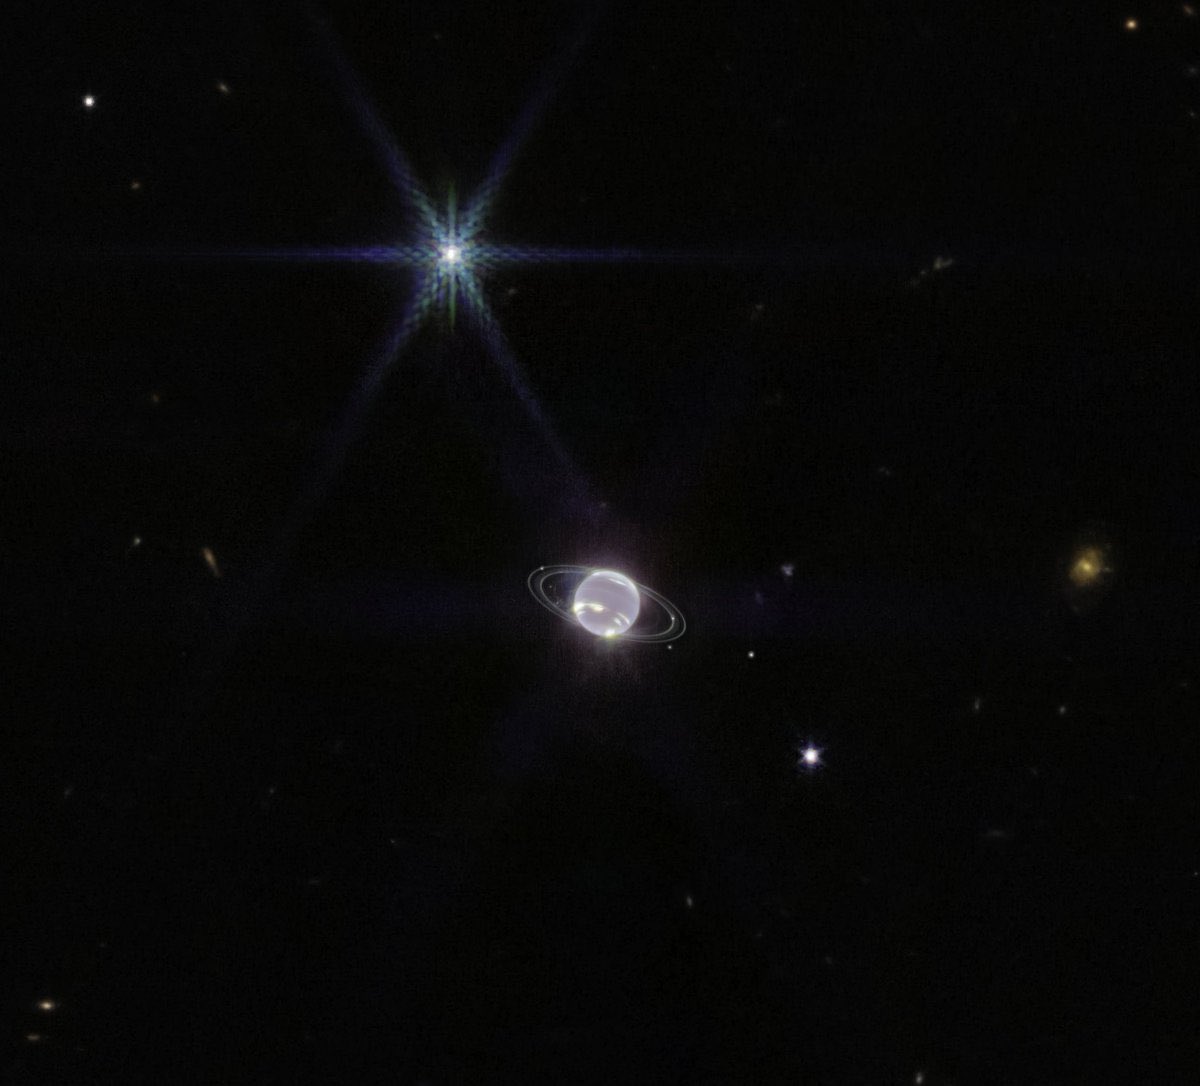 Neptune and its rings captured by JWST